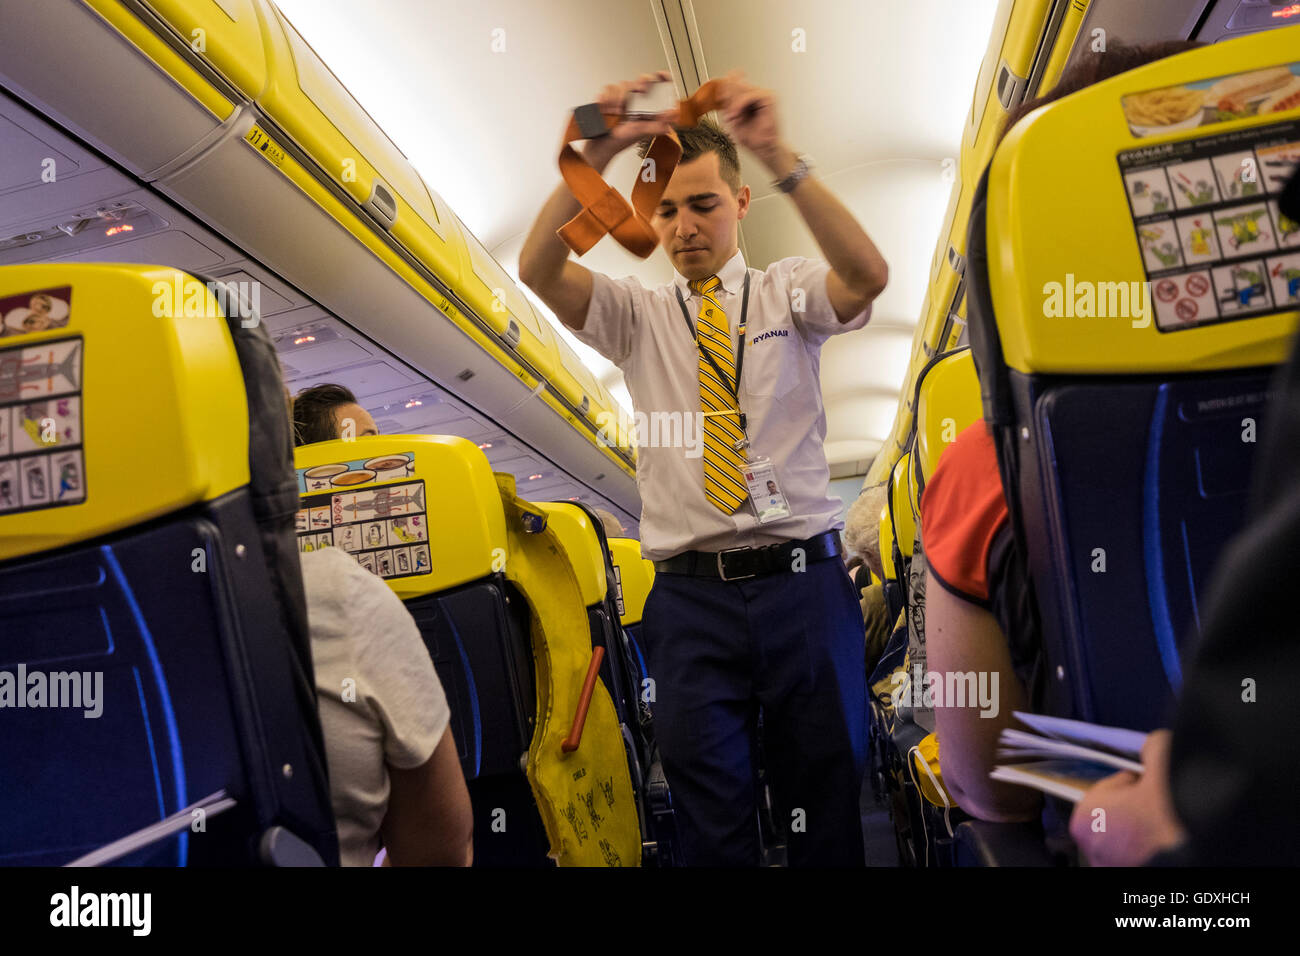 Male Ryanair cabin crew demonstrating safety procedures prior to departure, Stock Photo